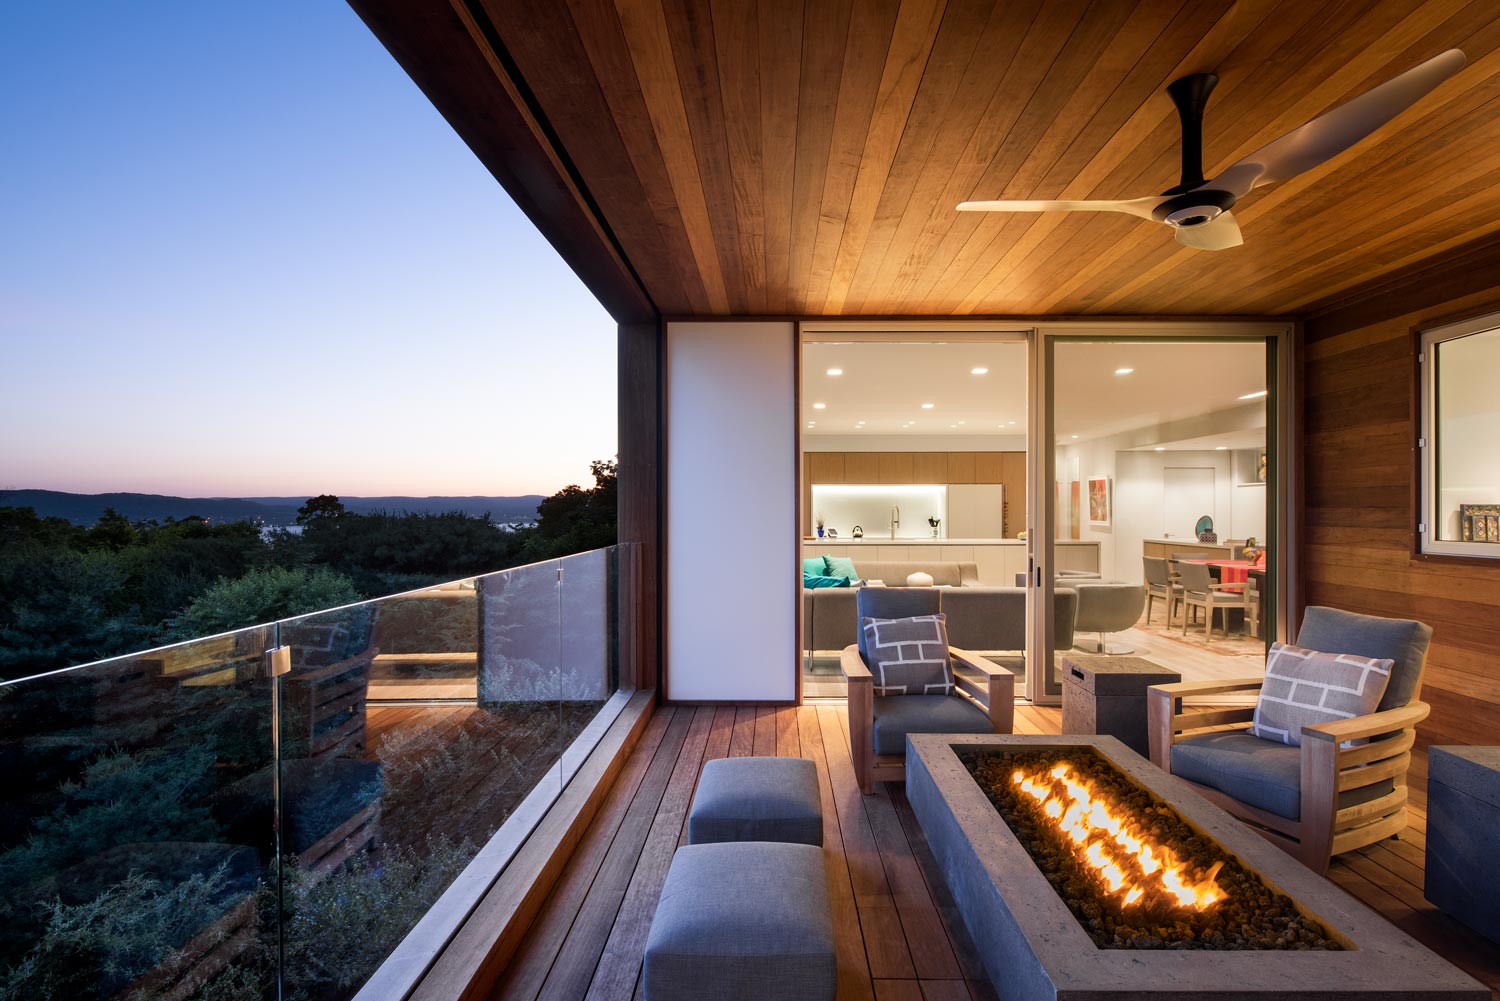 A covered balcony is warmed by a lit fireplace in front of an open sliding door.